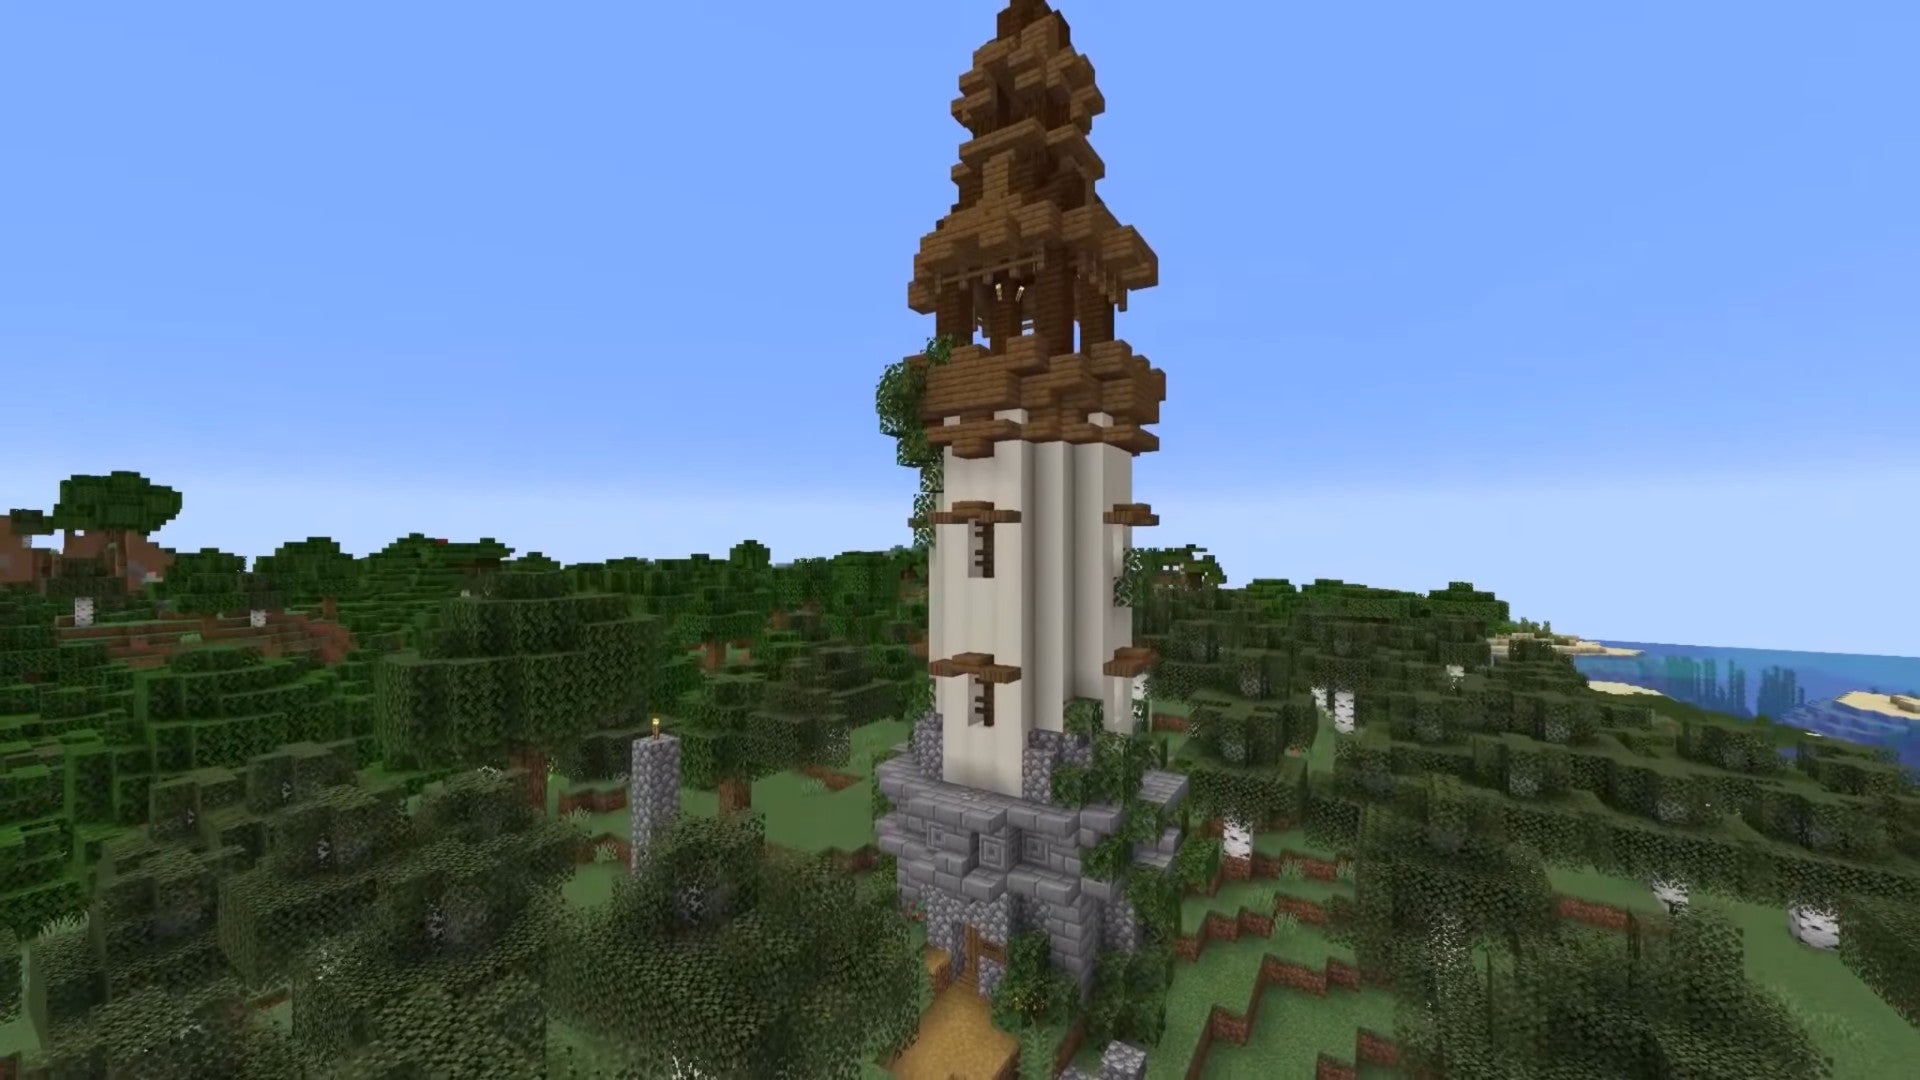 simple tower built of stone and wood towering over a forest in minecraft